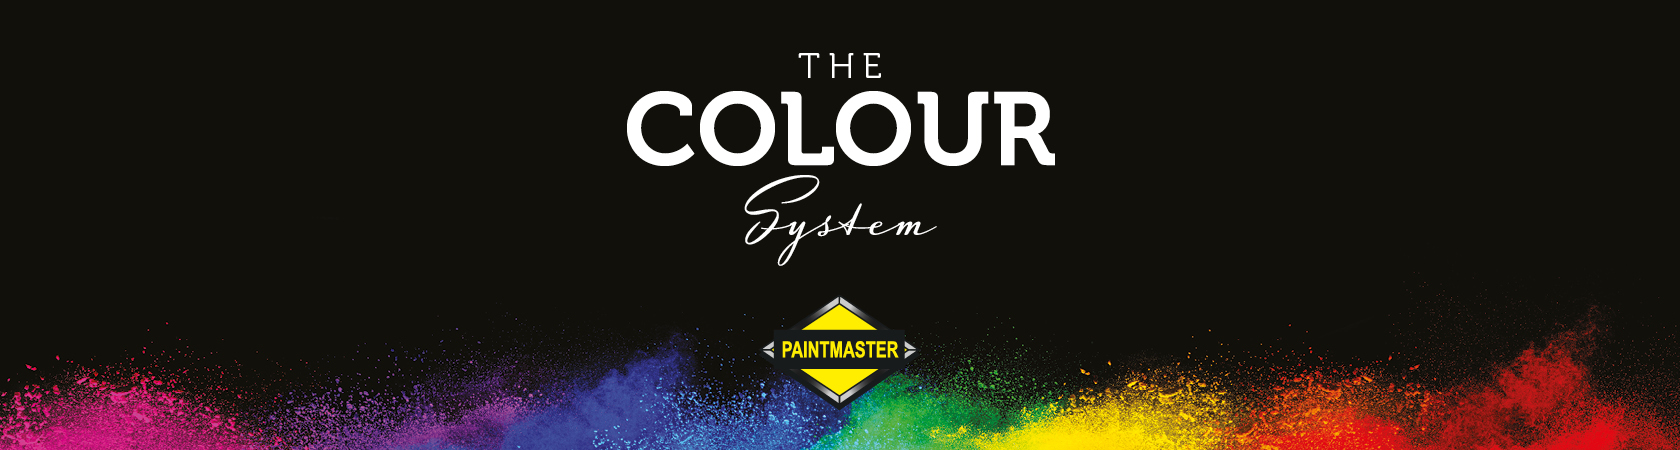 colour system category header for paint